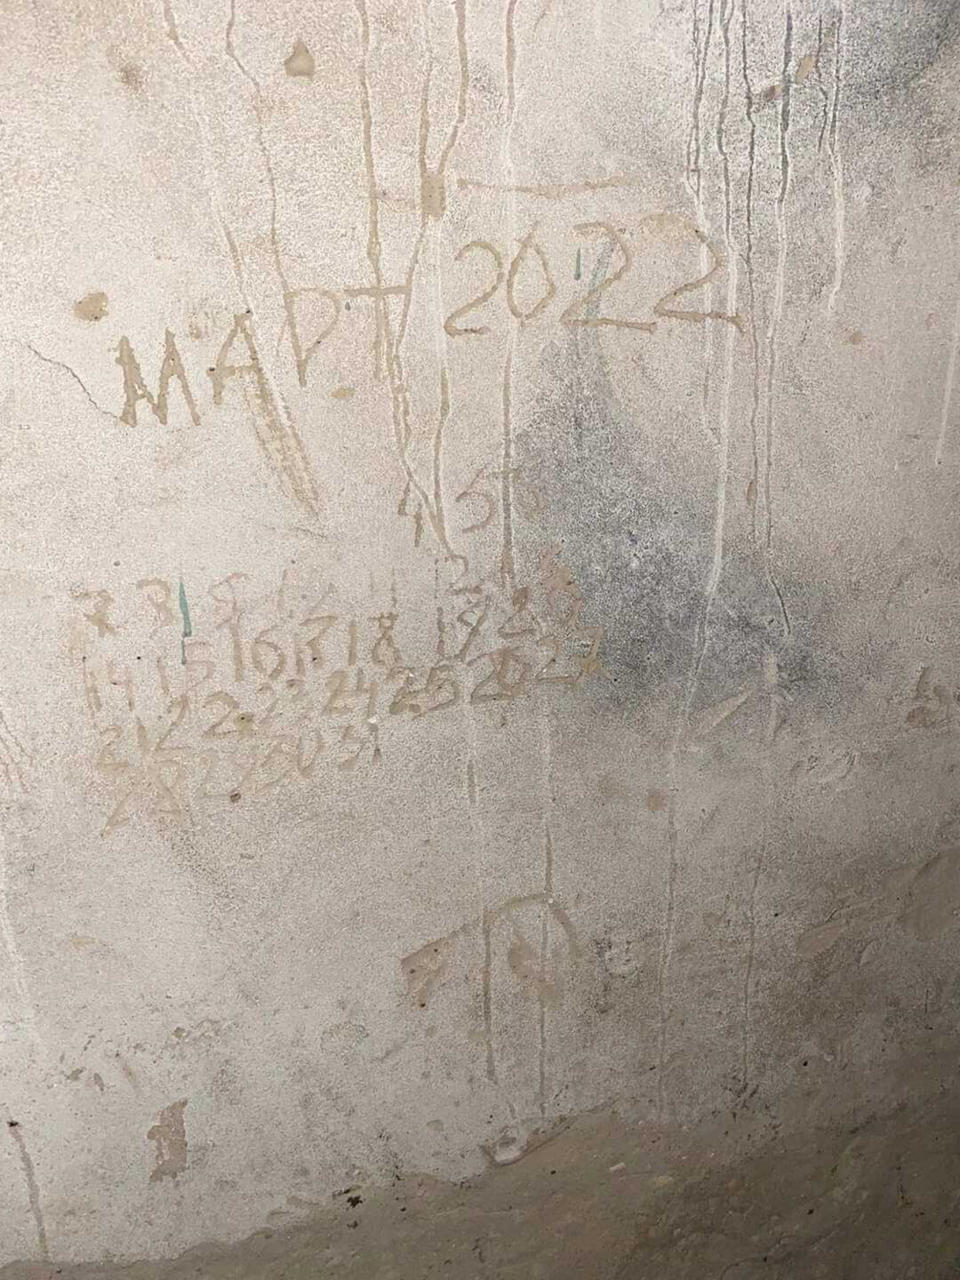 A picture of the makeshift calendar, etched into the walls of the school's basement, so those held captive could keep track of the passing days. (Courtesy Tetyana Diohtyar)